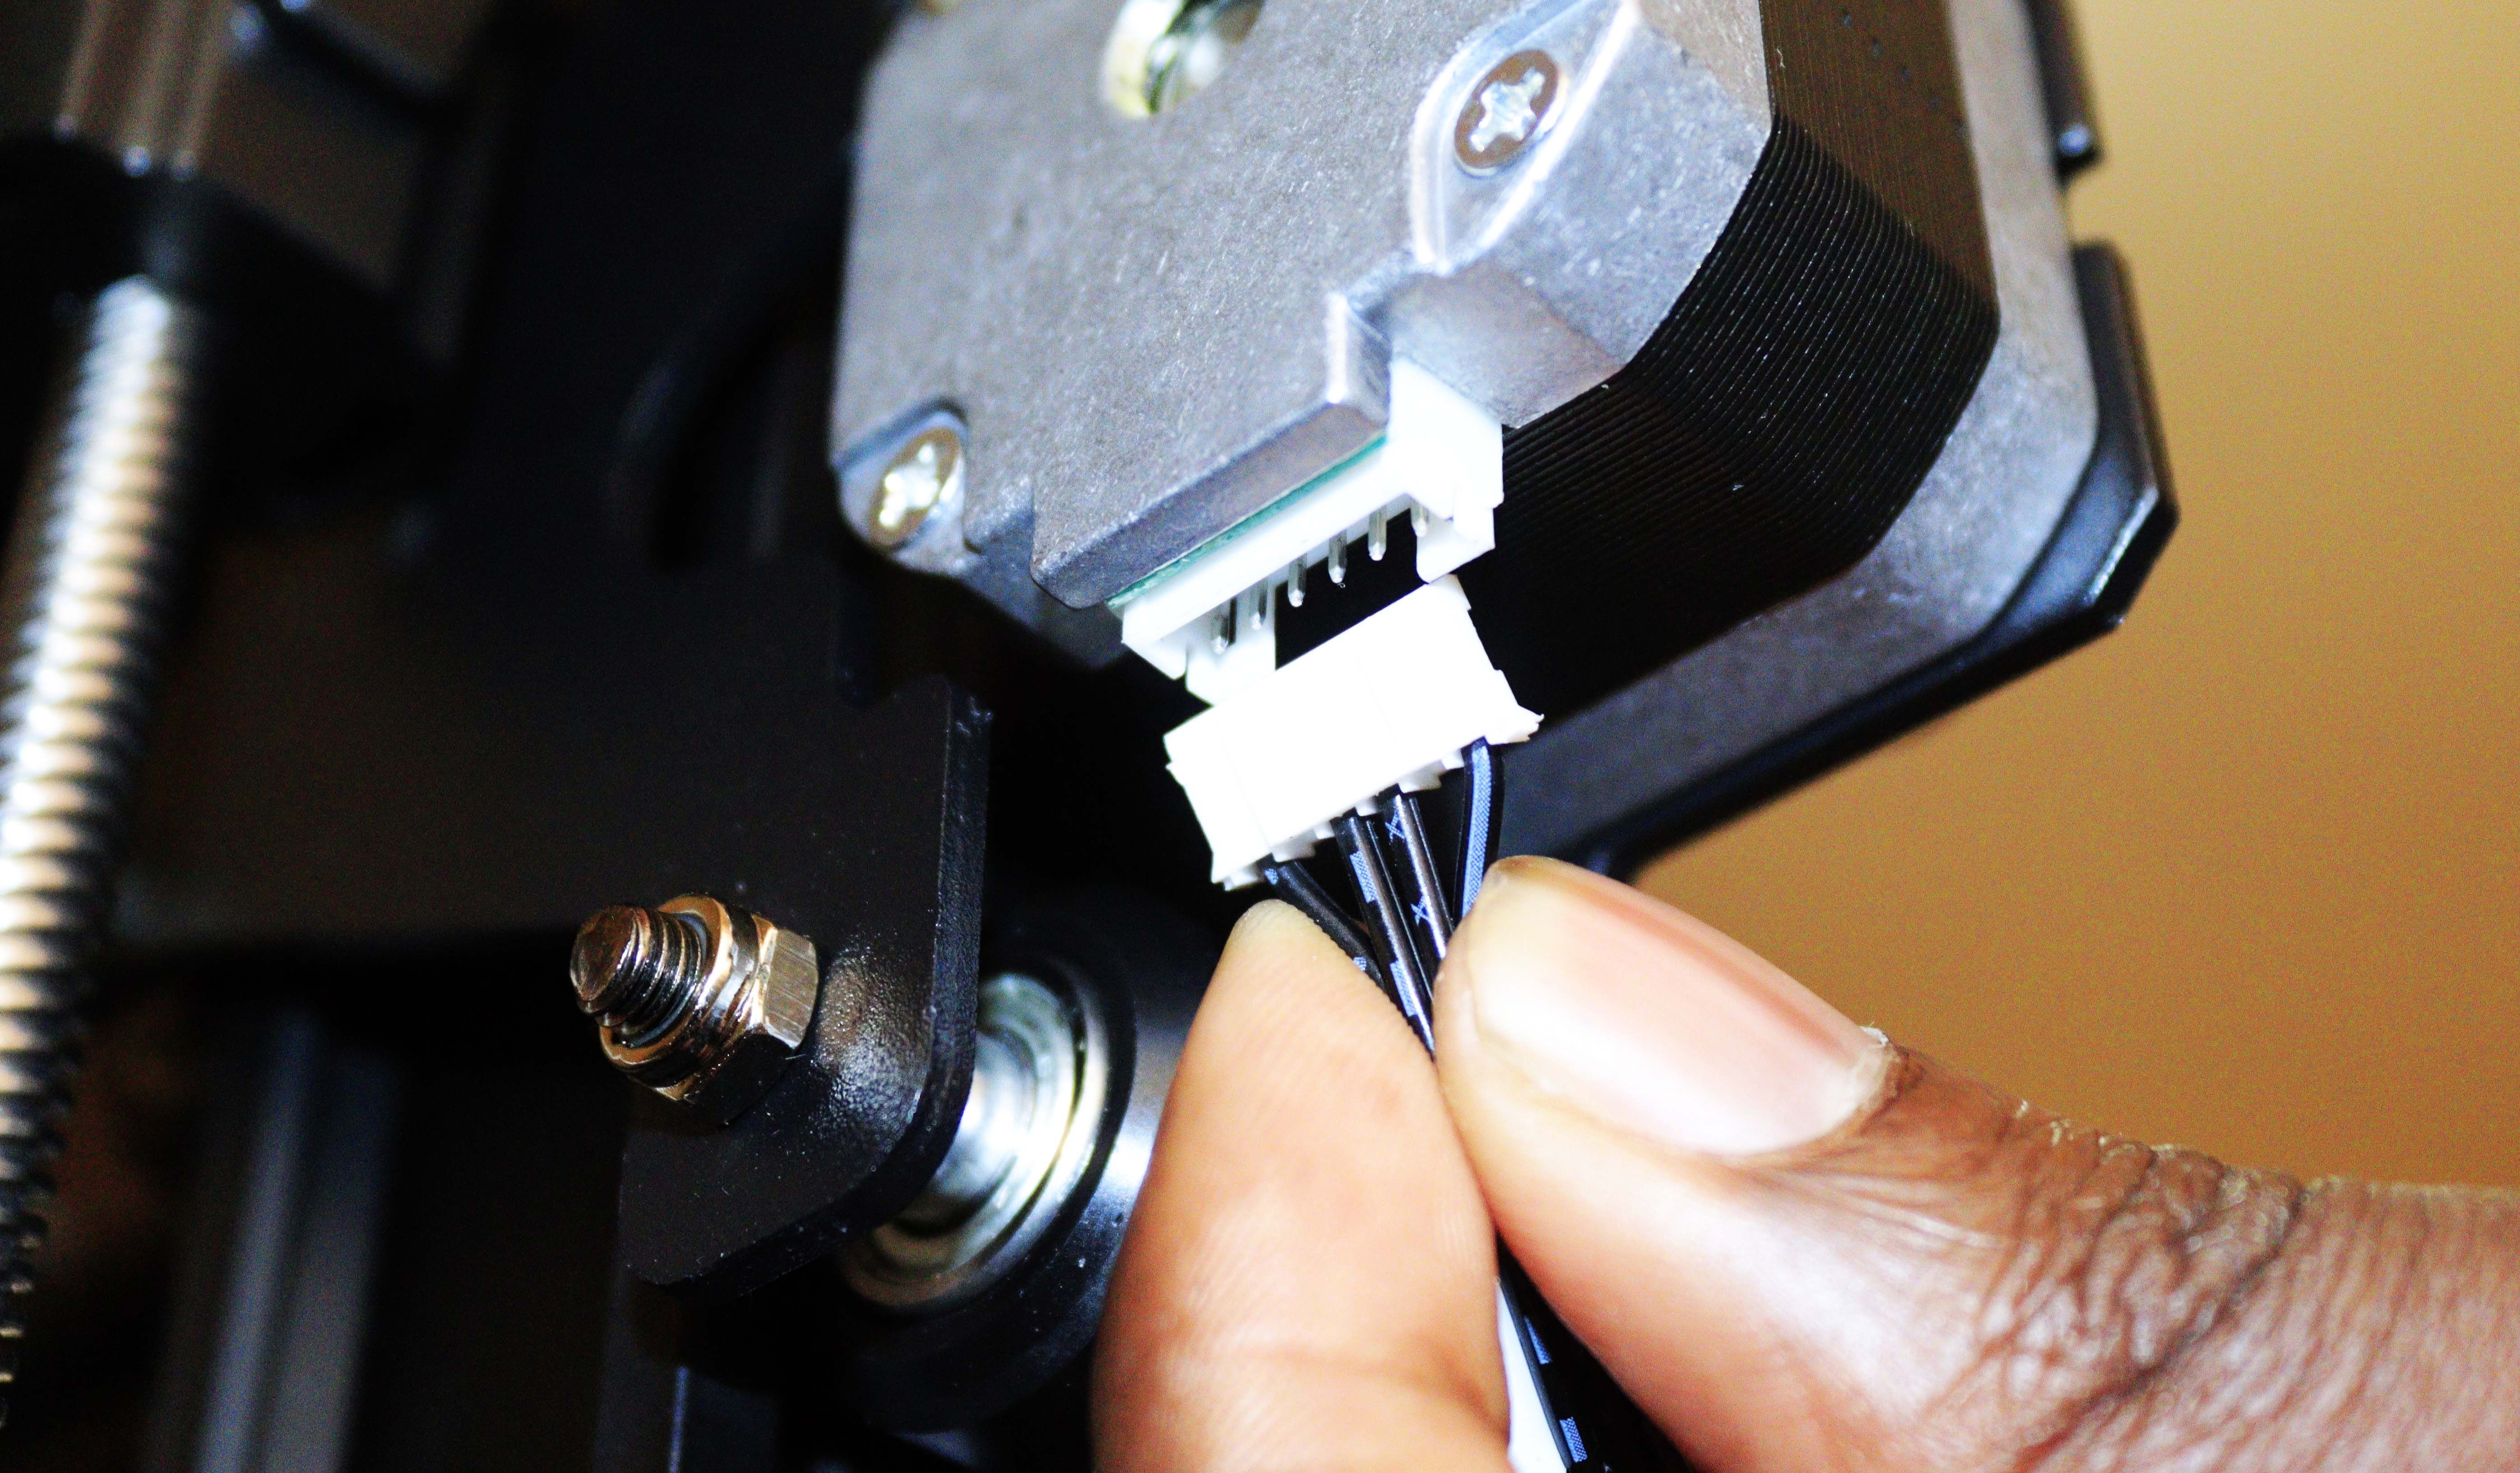 Inserting wires to motors of the printer